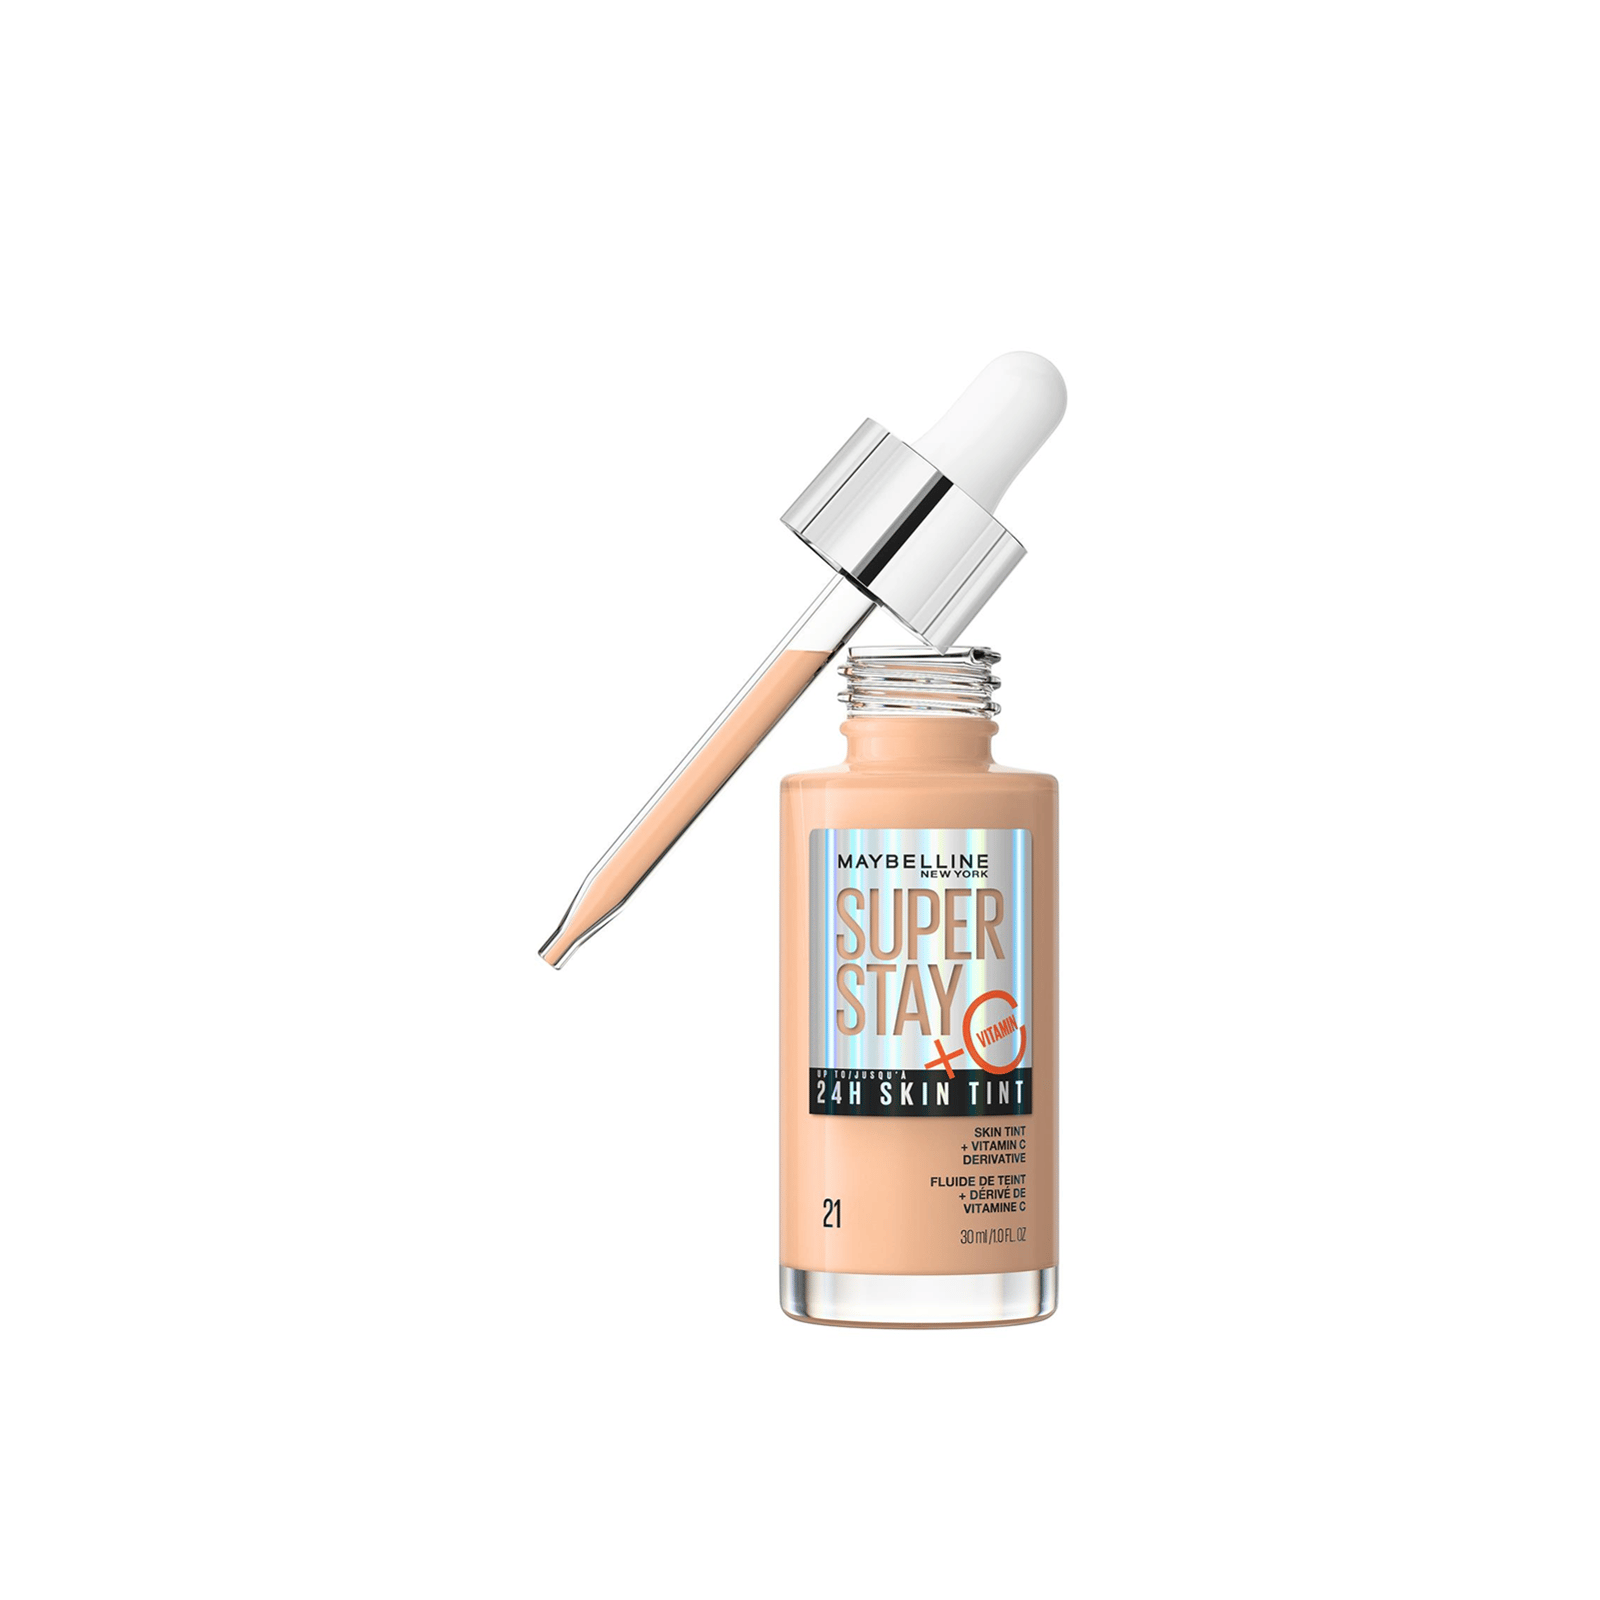 Maybelline Super Stay 24H Skin Tint Foundation 21 30ml